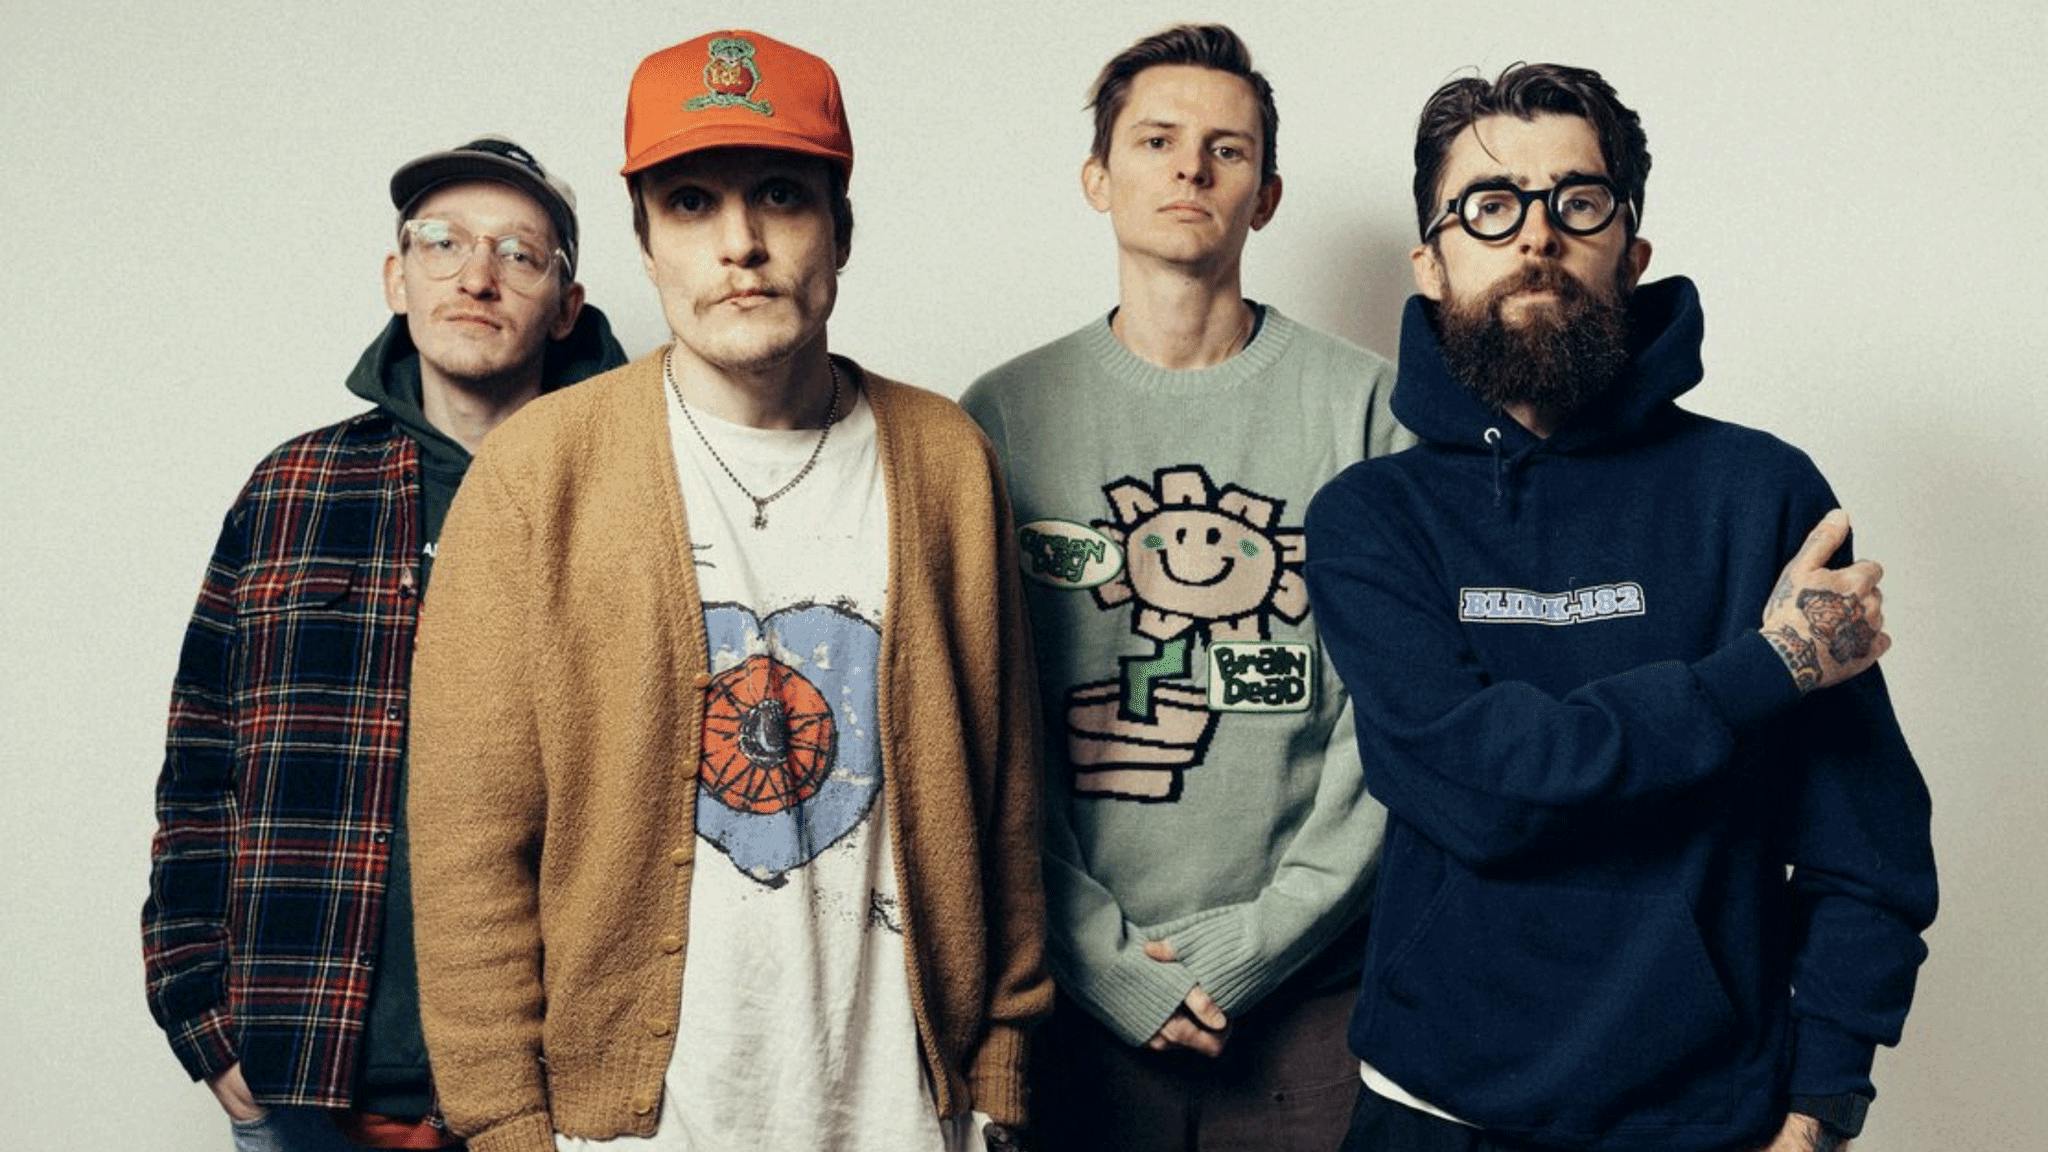 Ben Barlow: “We’re remembering what people love about Neck Deep and trying to bottle that”